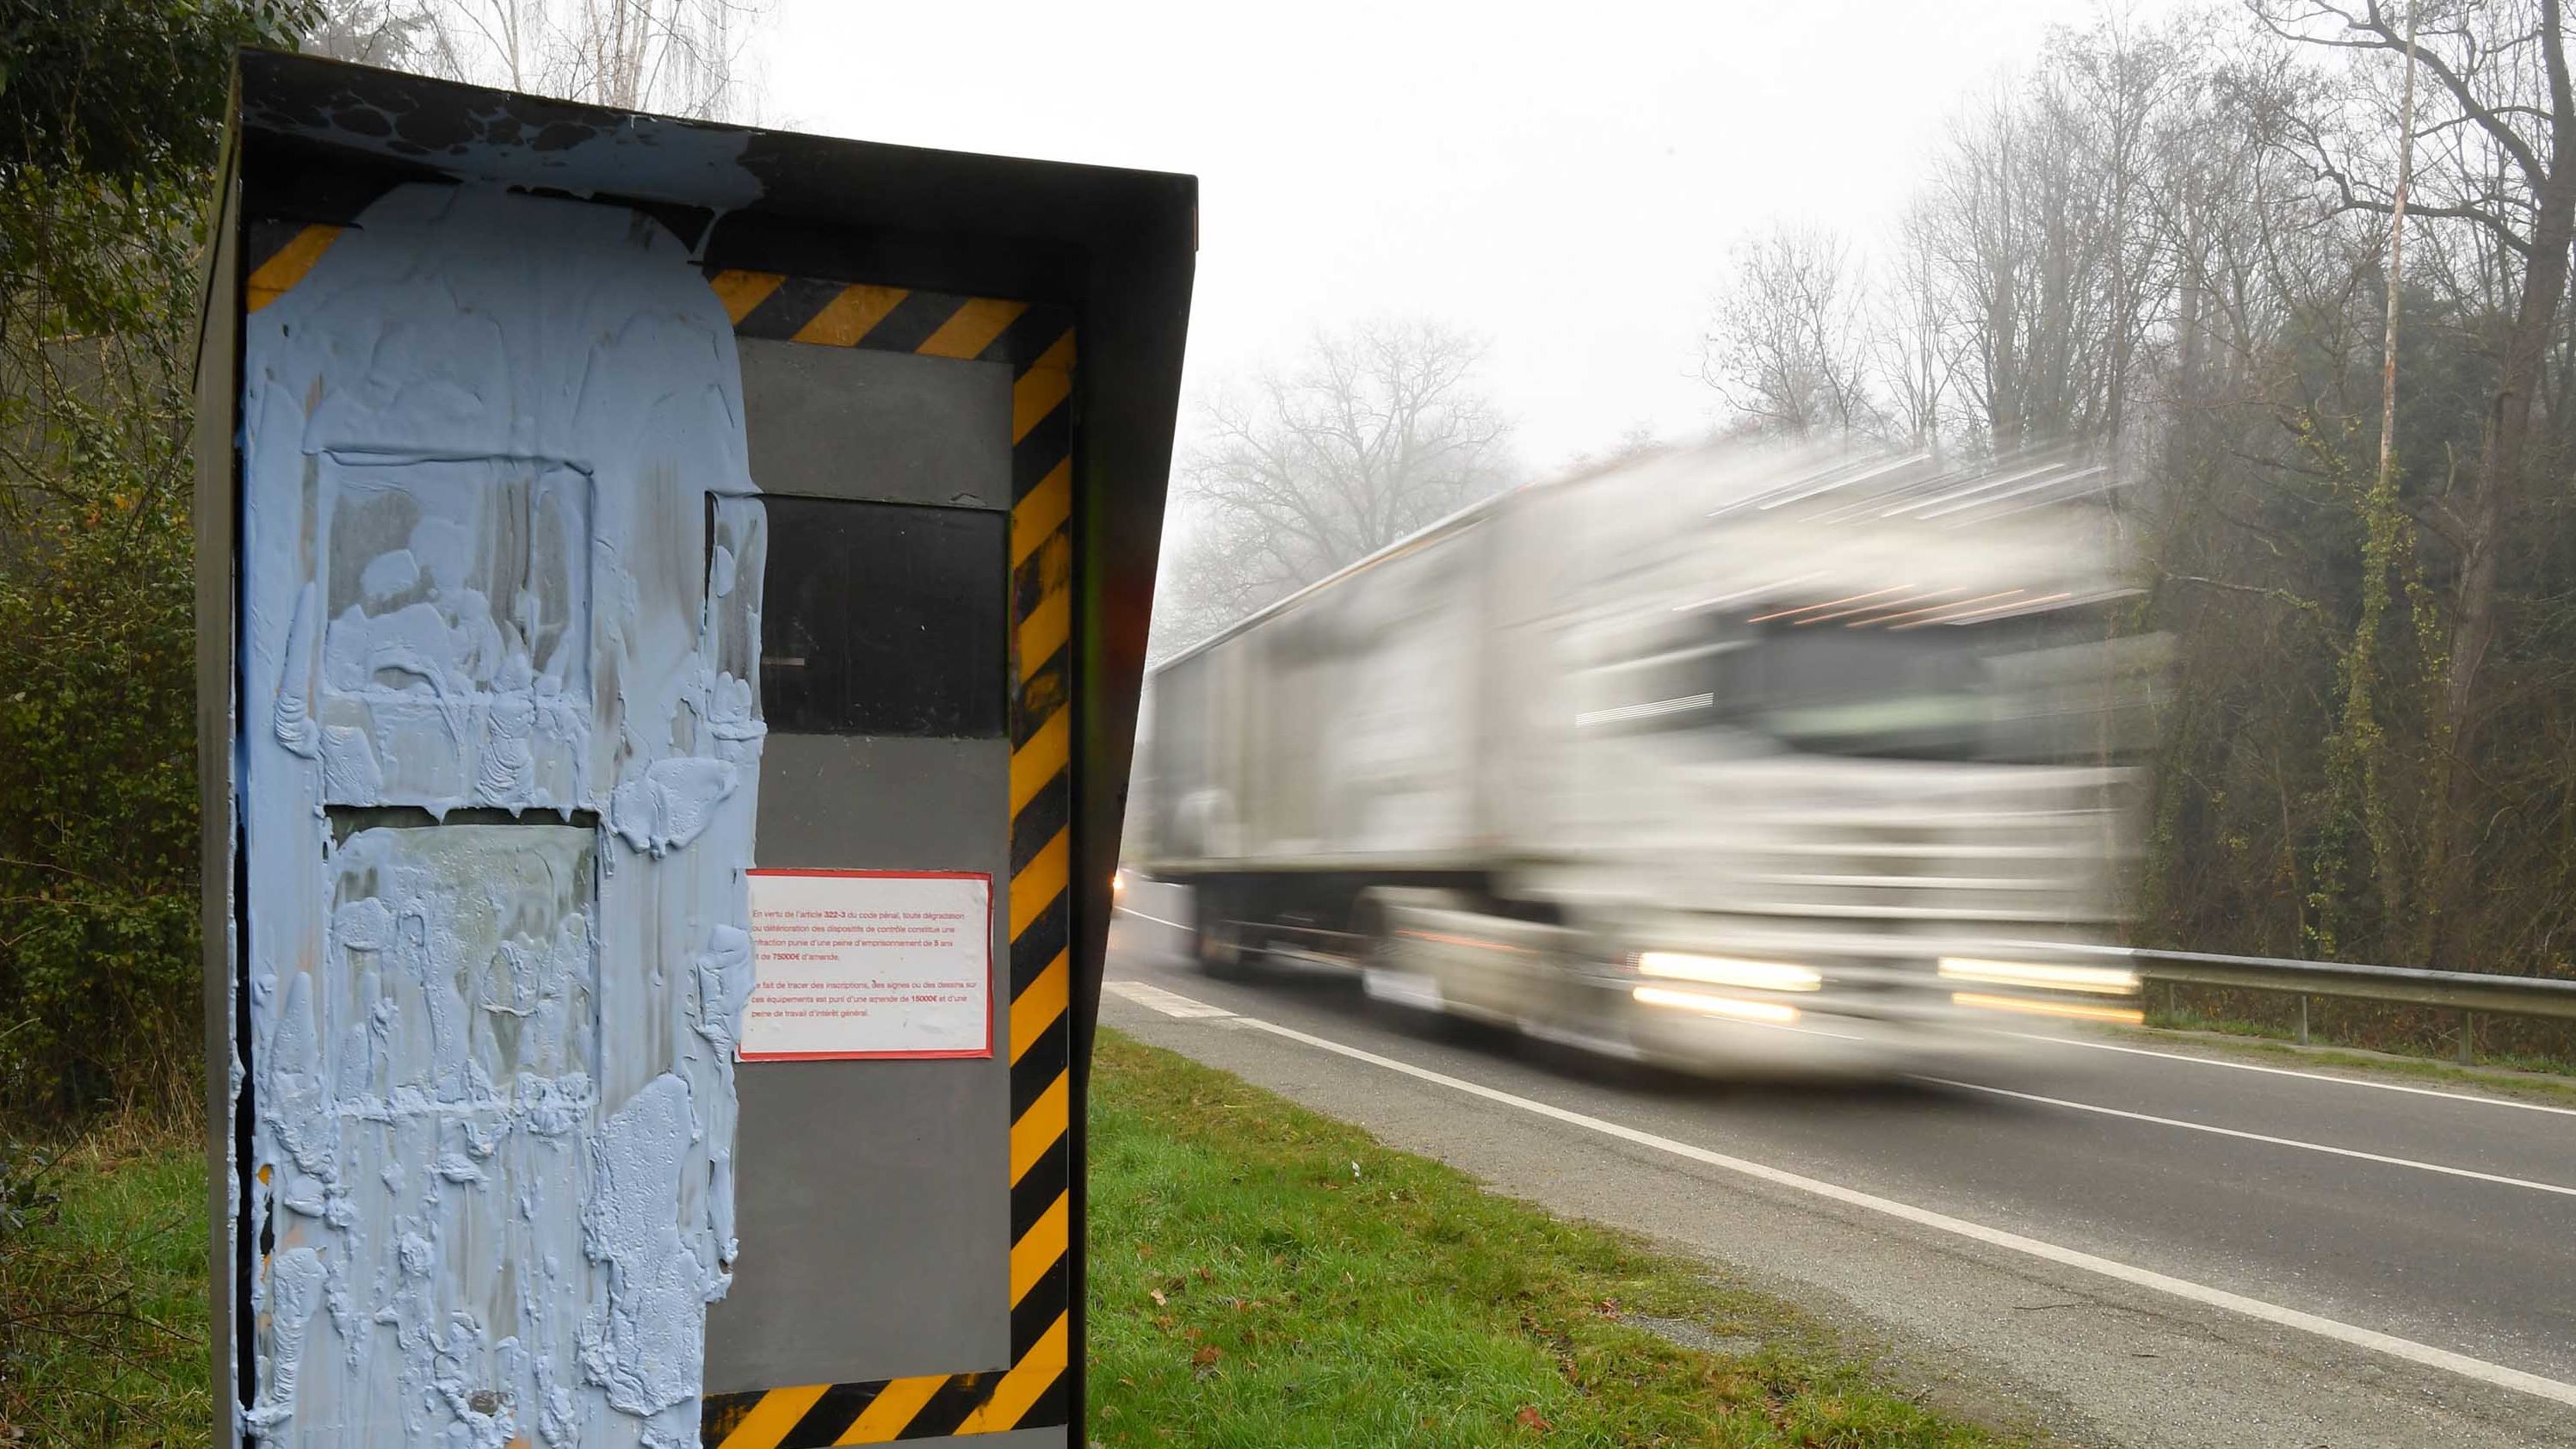 About 60% of speed cameras in France have been vandalized by yellow-vest protesters.